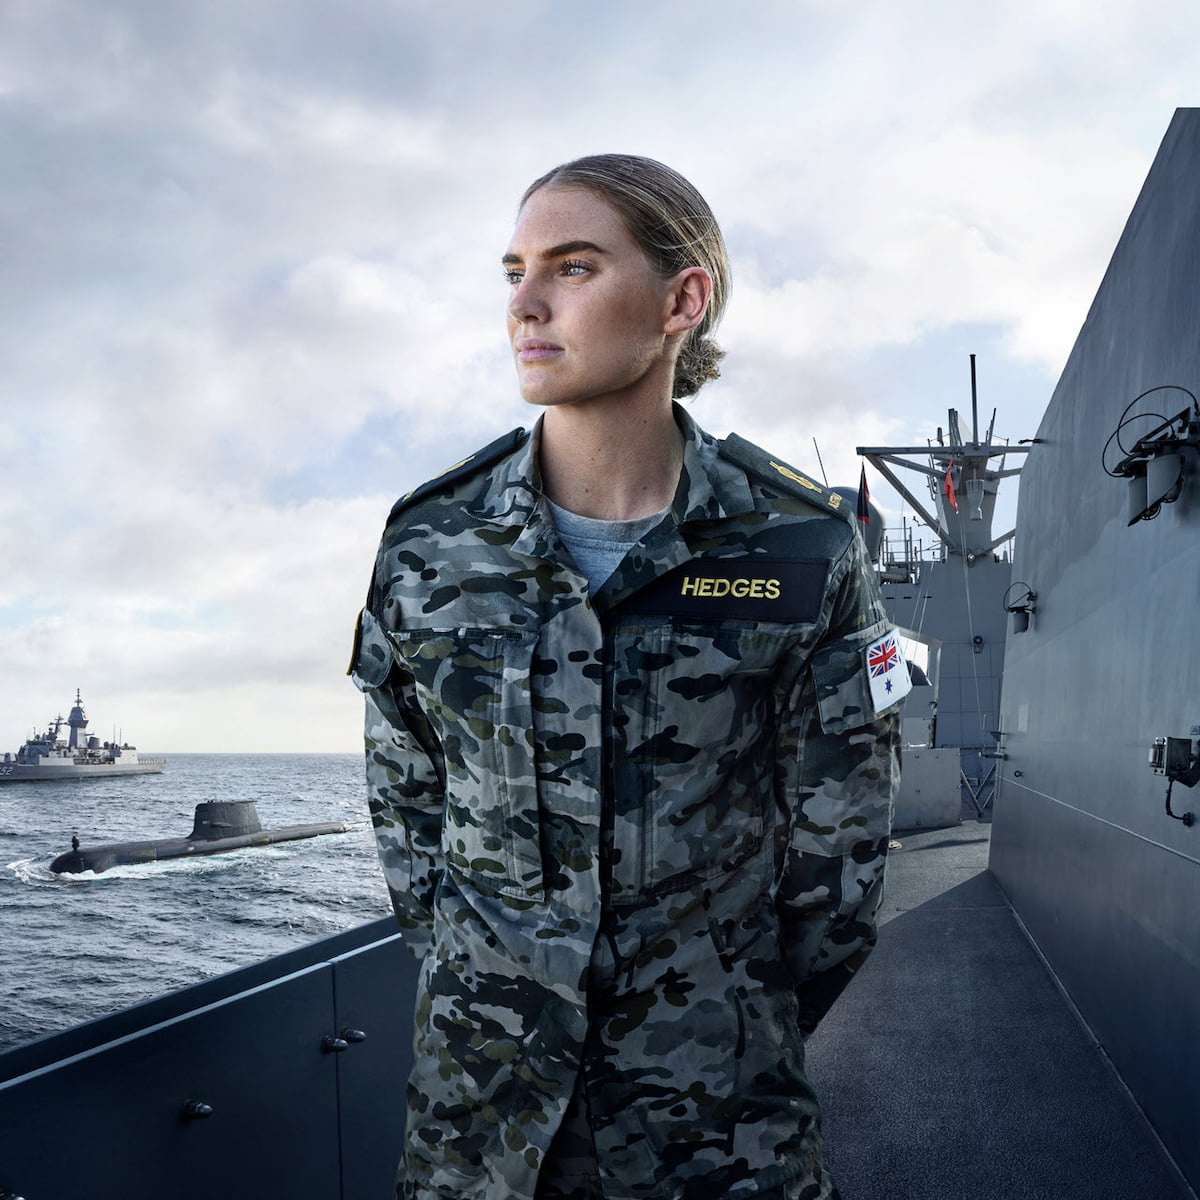 A woman in camouflage uniform stands on a ship, ready for action.